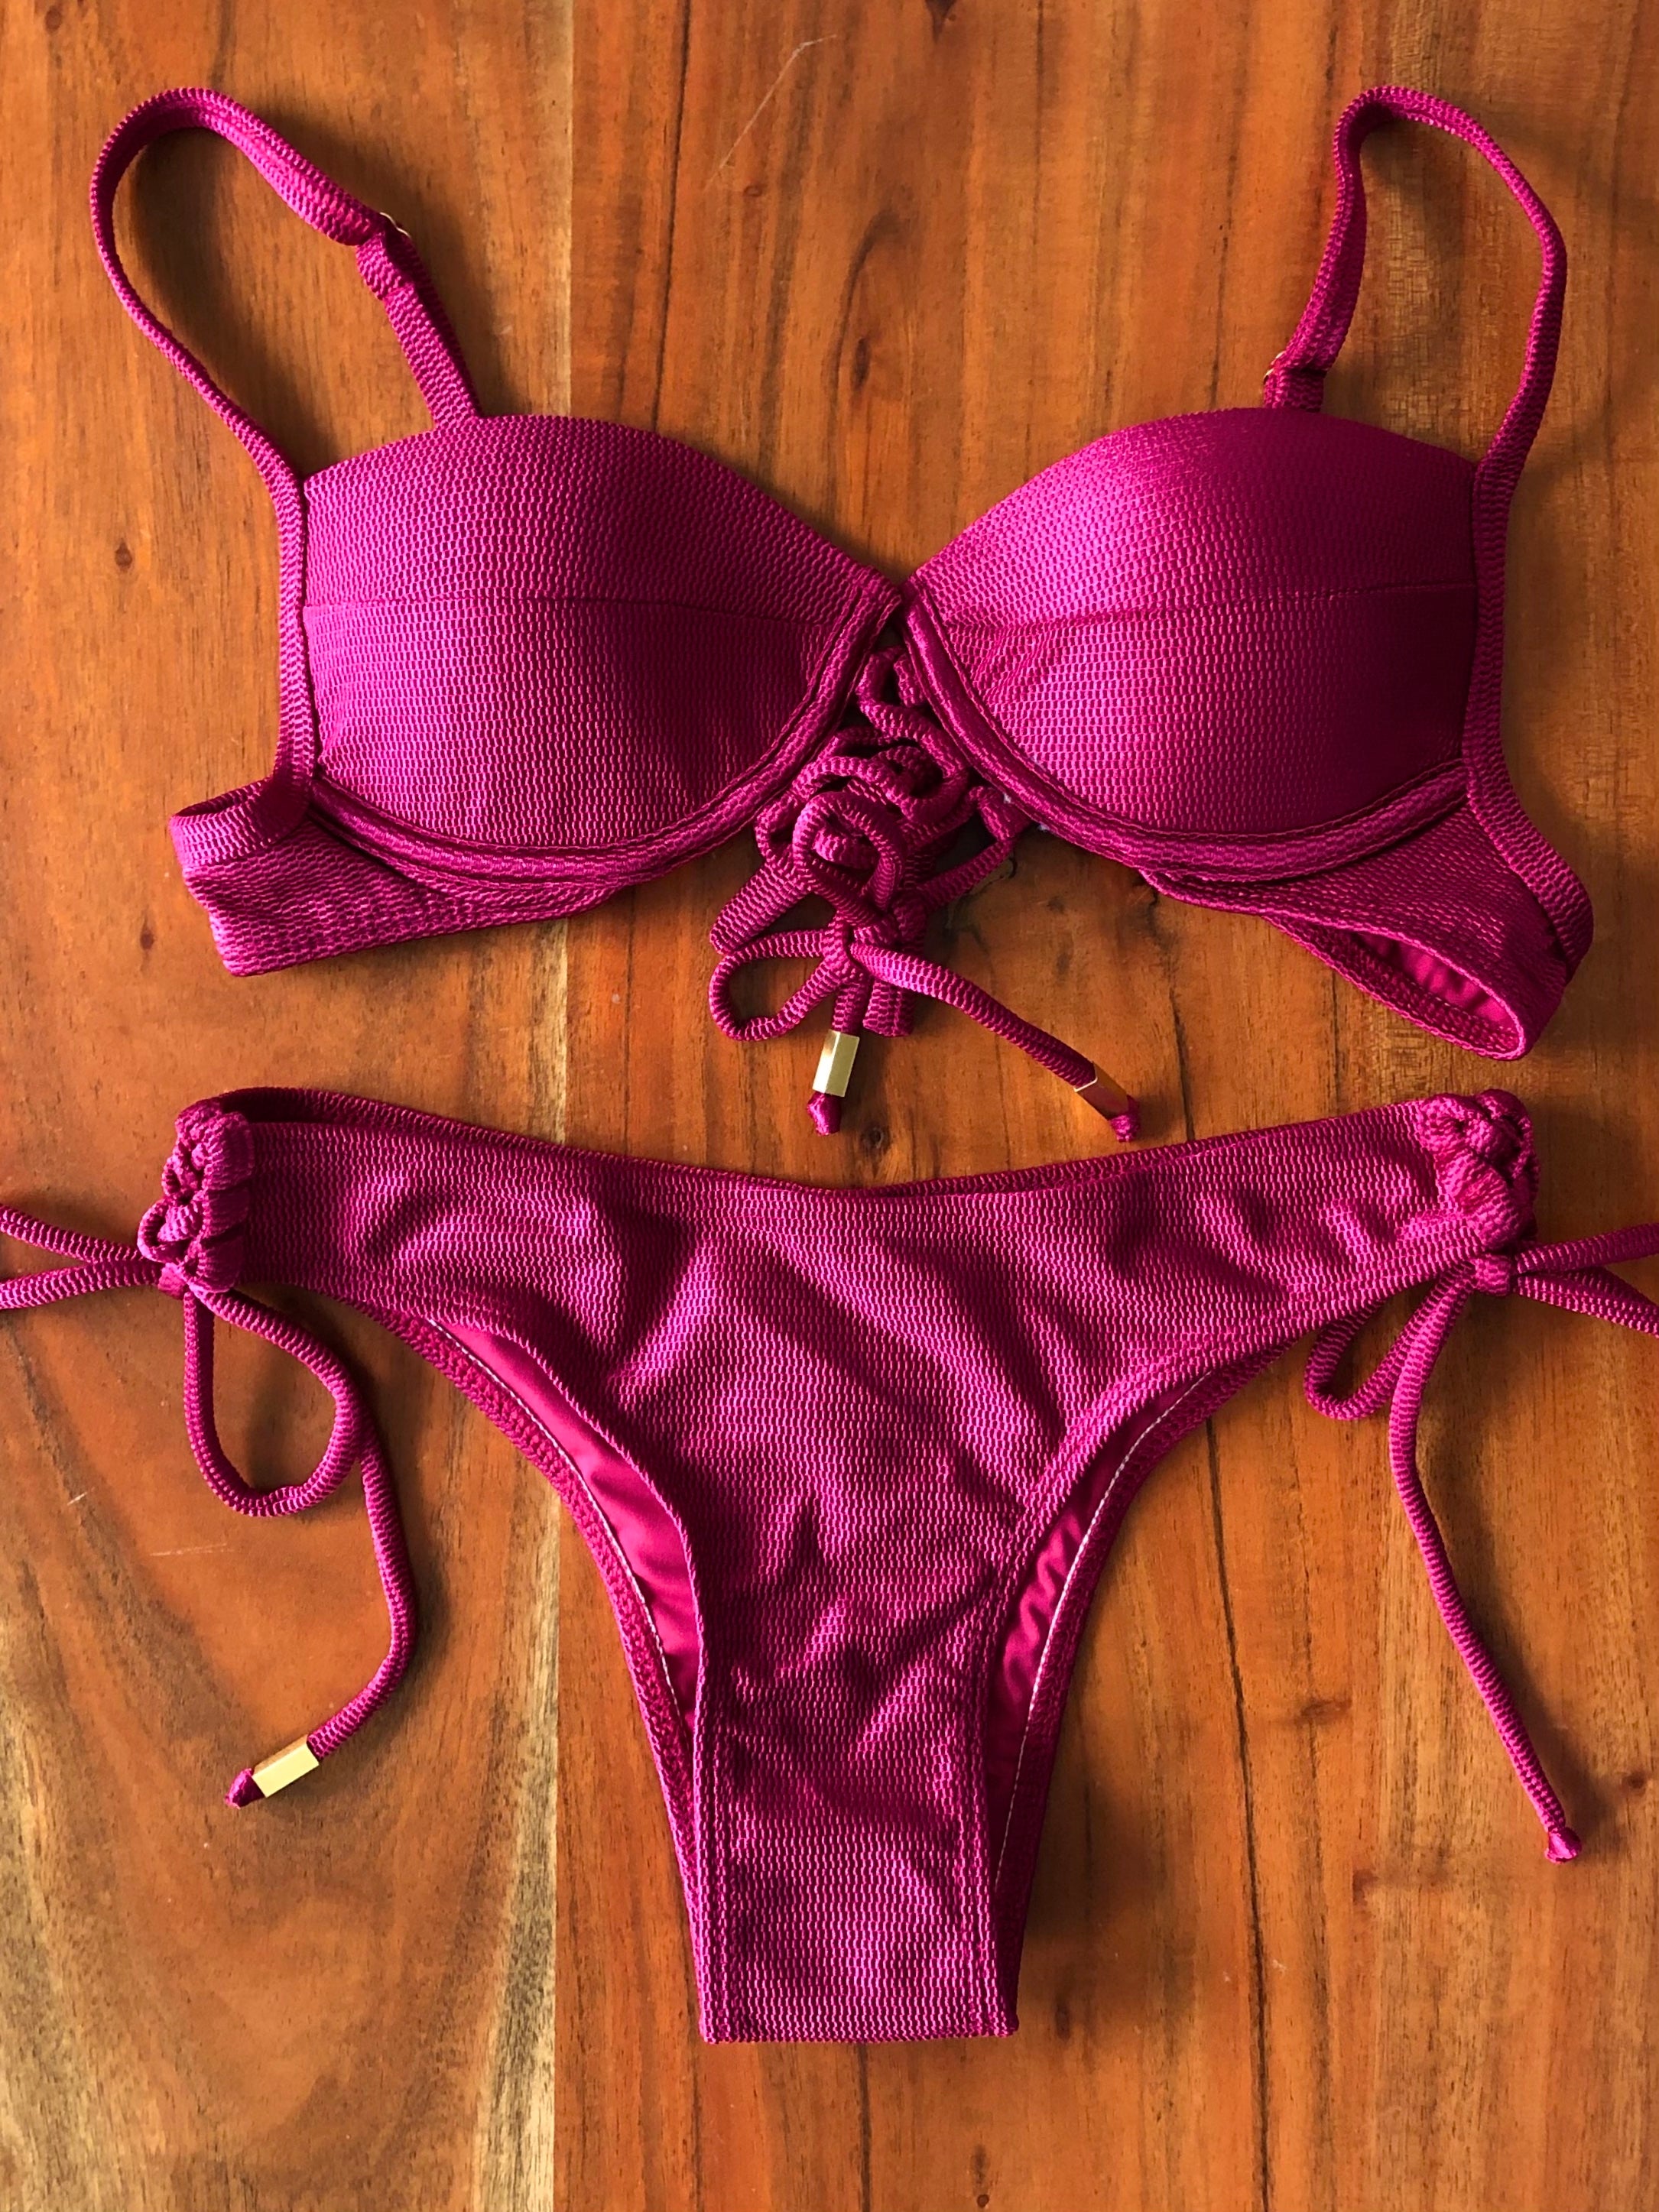 Bikini set: Balconette with push-up effect and bottoms with side